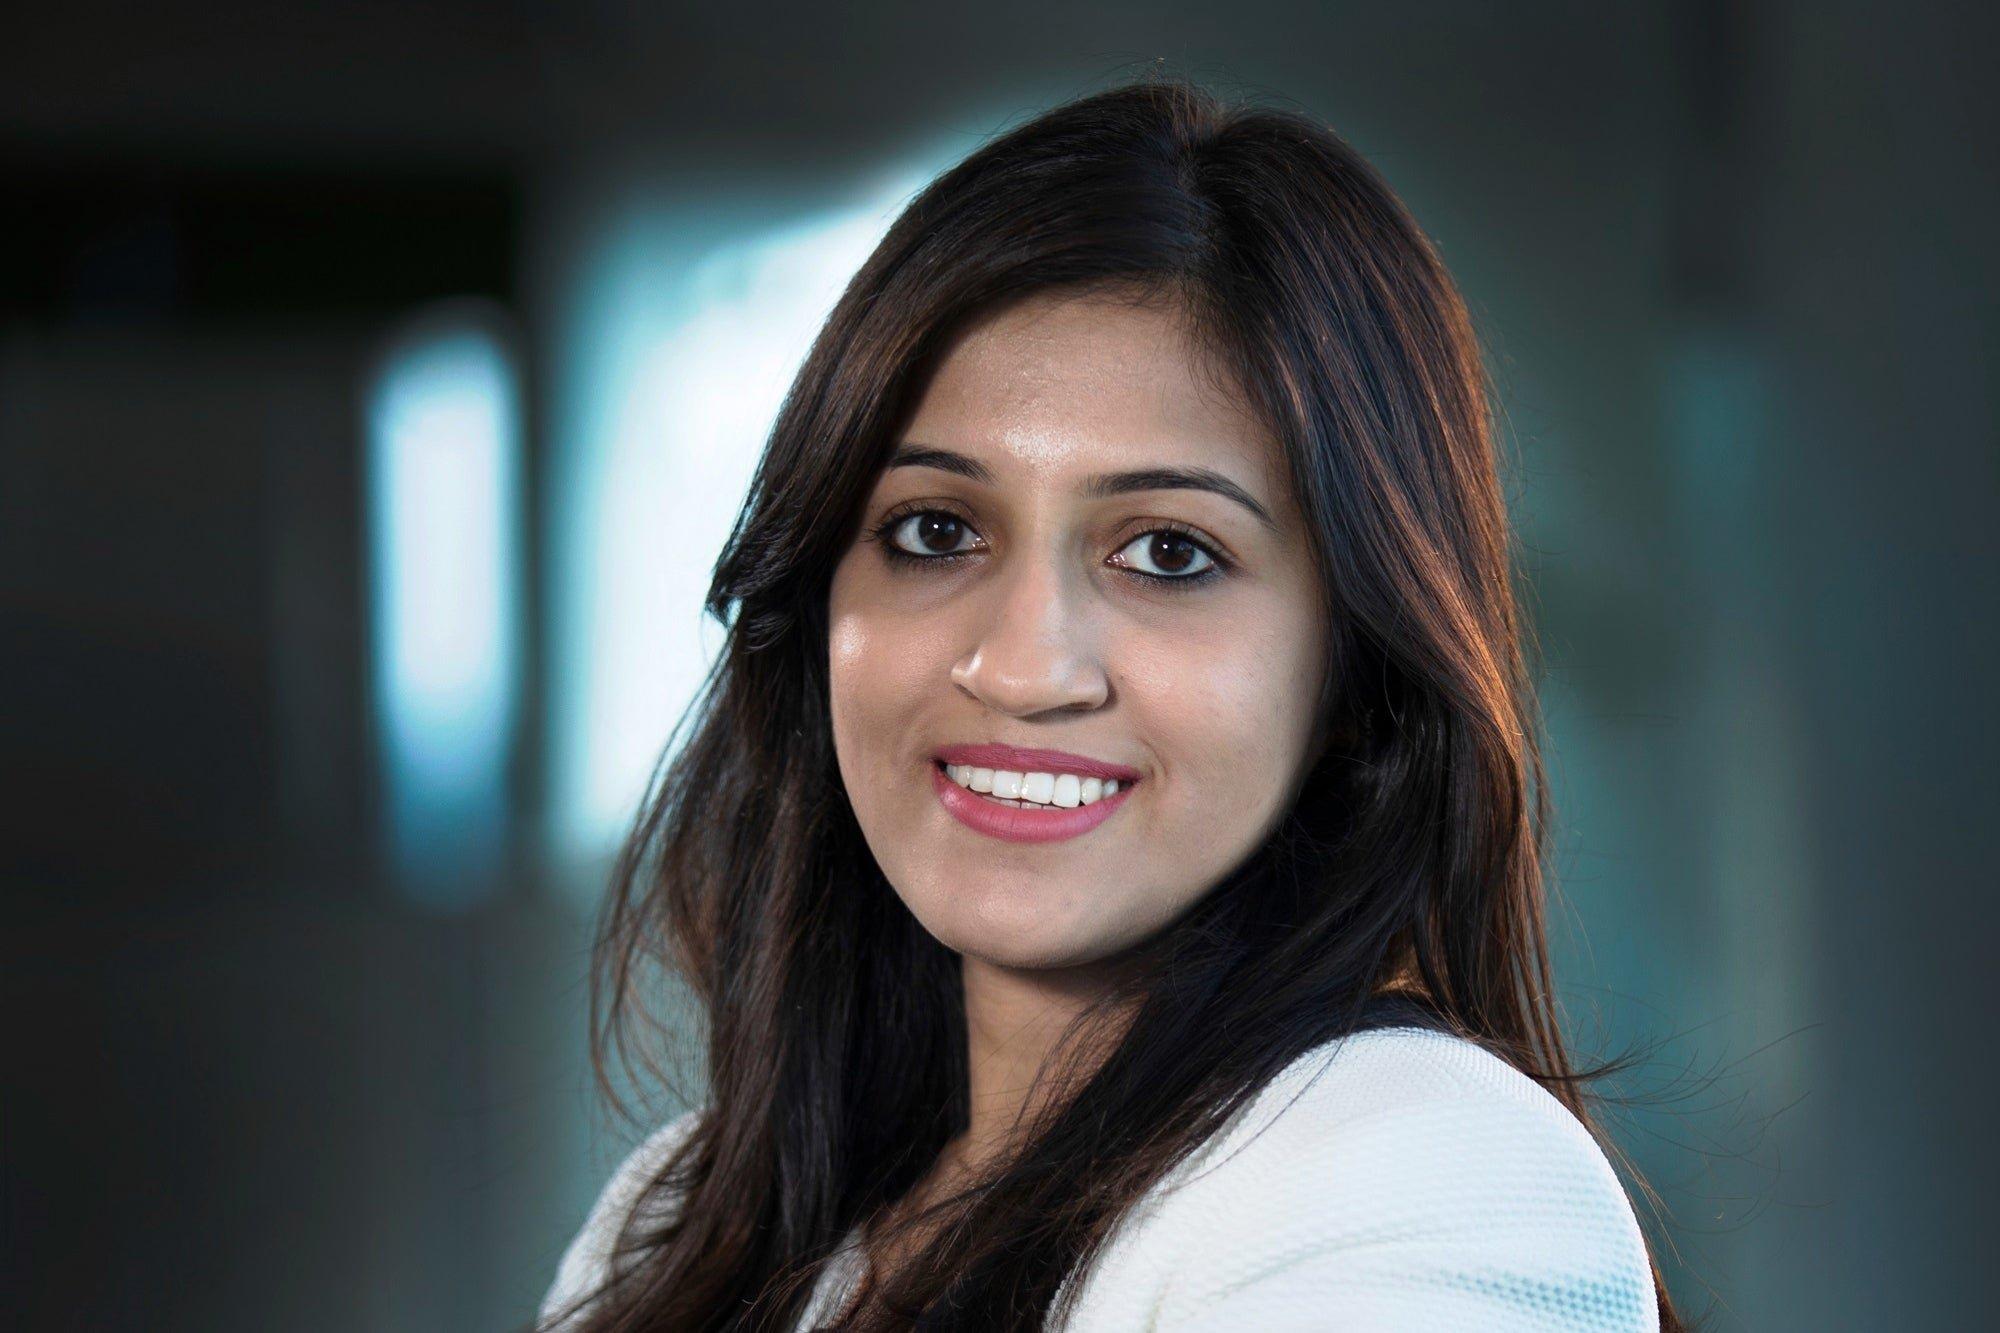 9. Divya Gokulnath is the co-founder of which of the following startups?